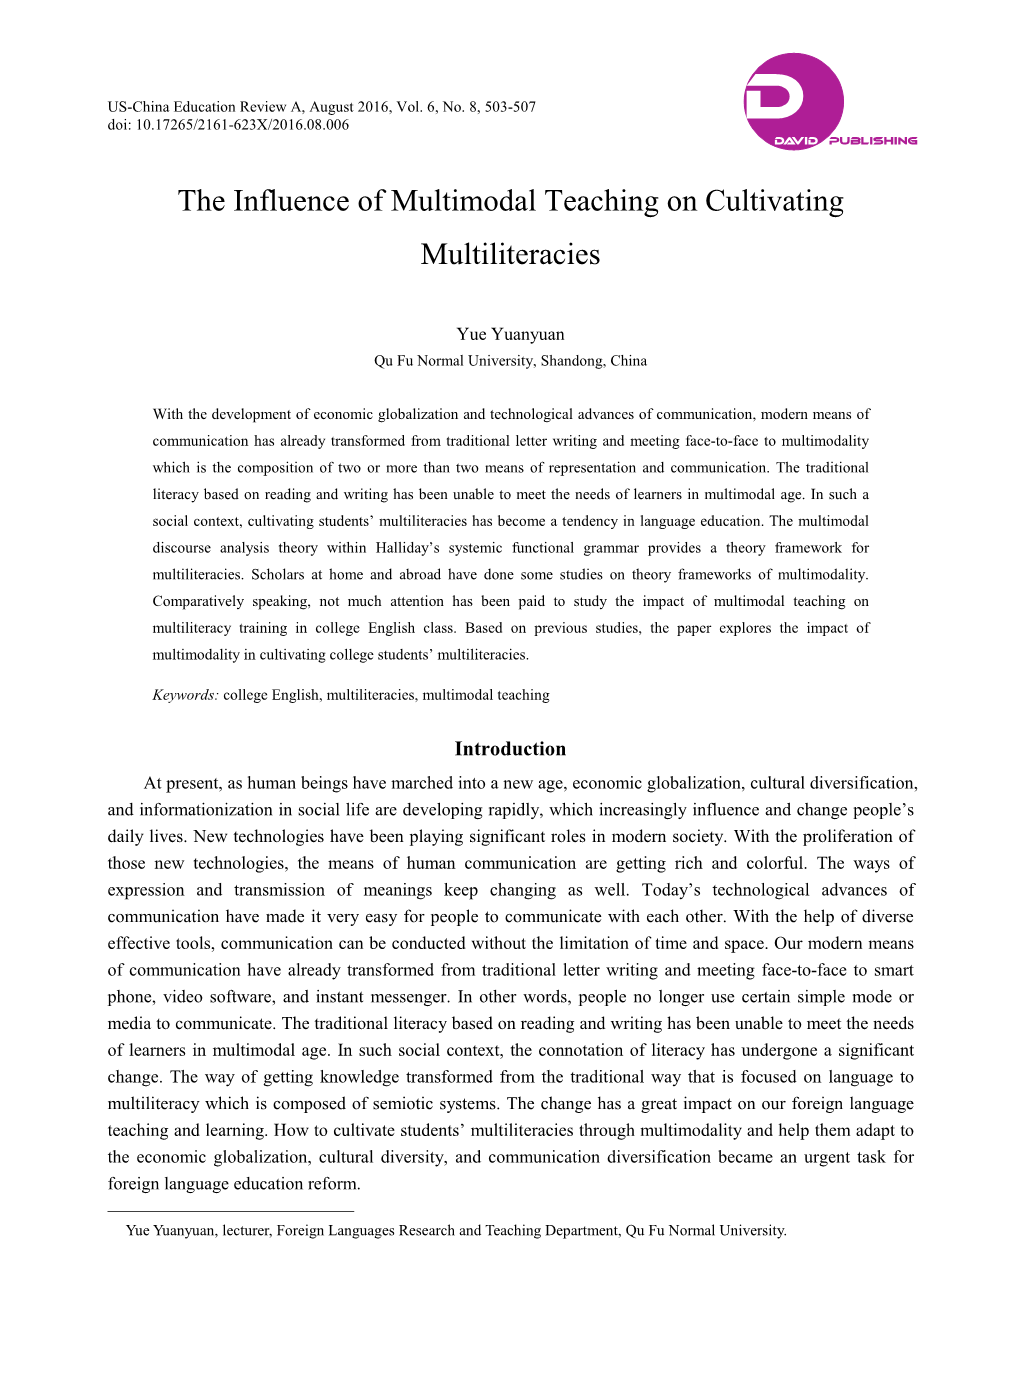 The Influence of Multimodal Teaching on Cultivating Multiliteracies